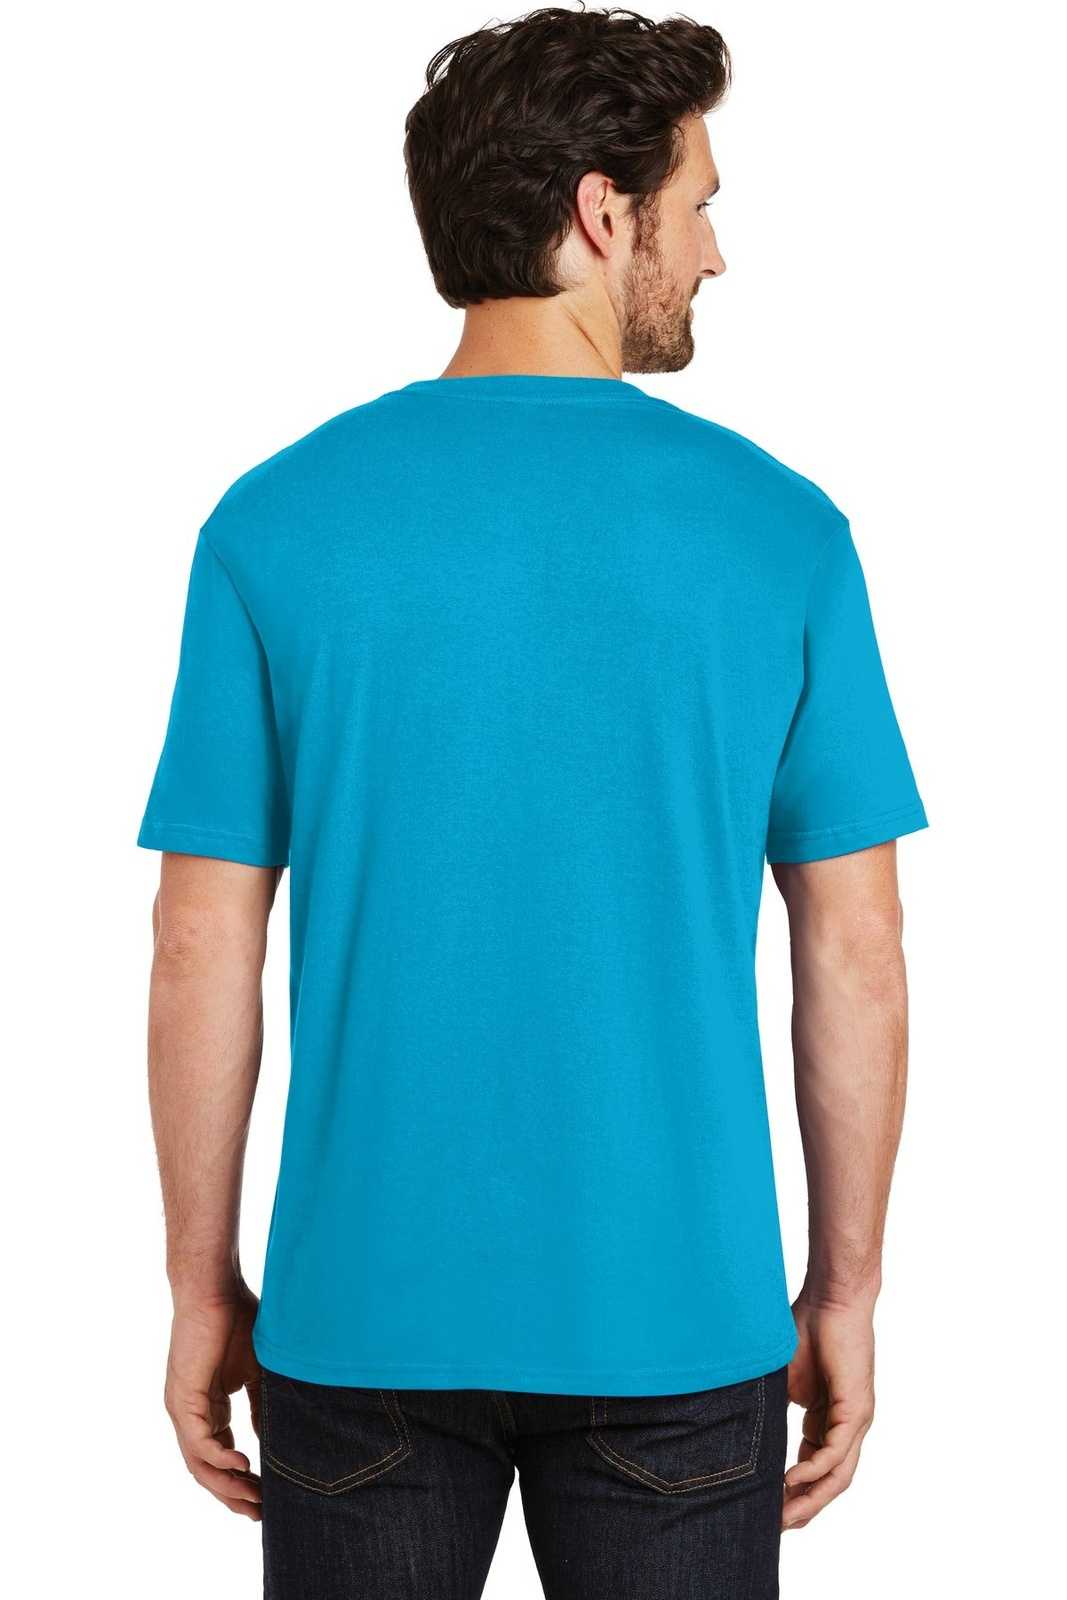 District DT104 Perfect Weight Tee - Bright Turquoise - HIT a Double - 1